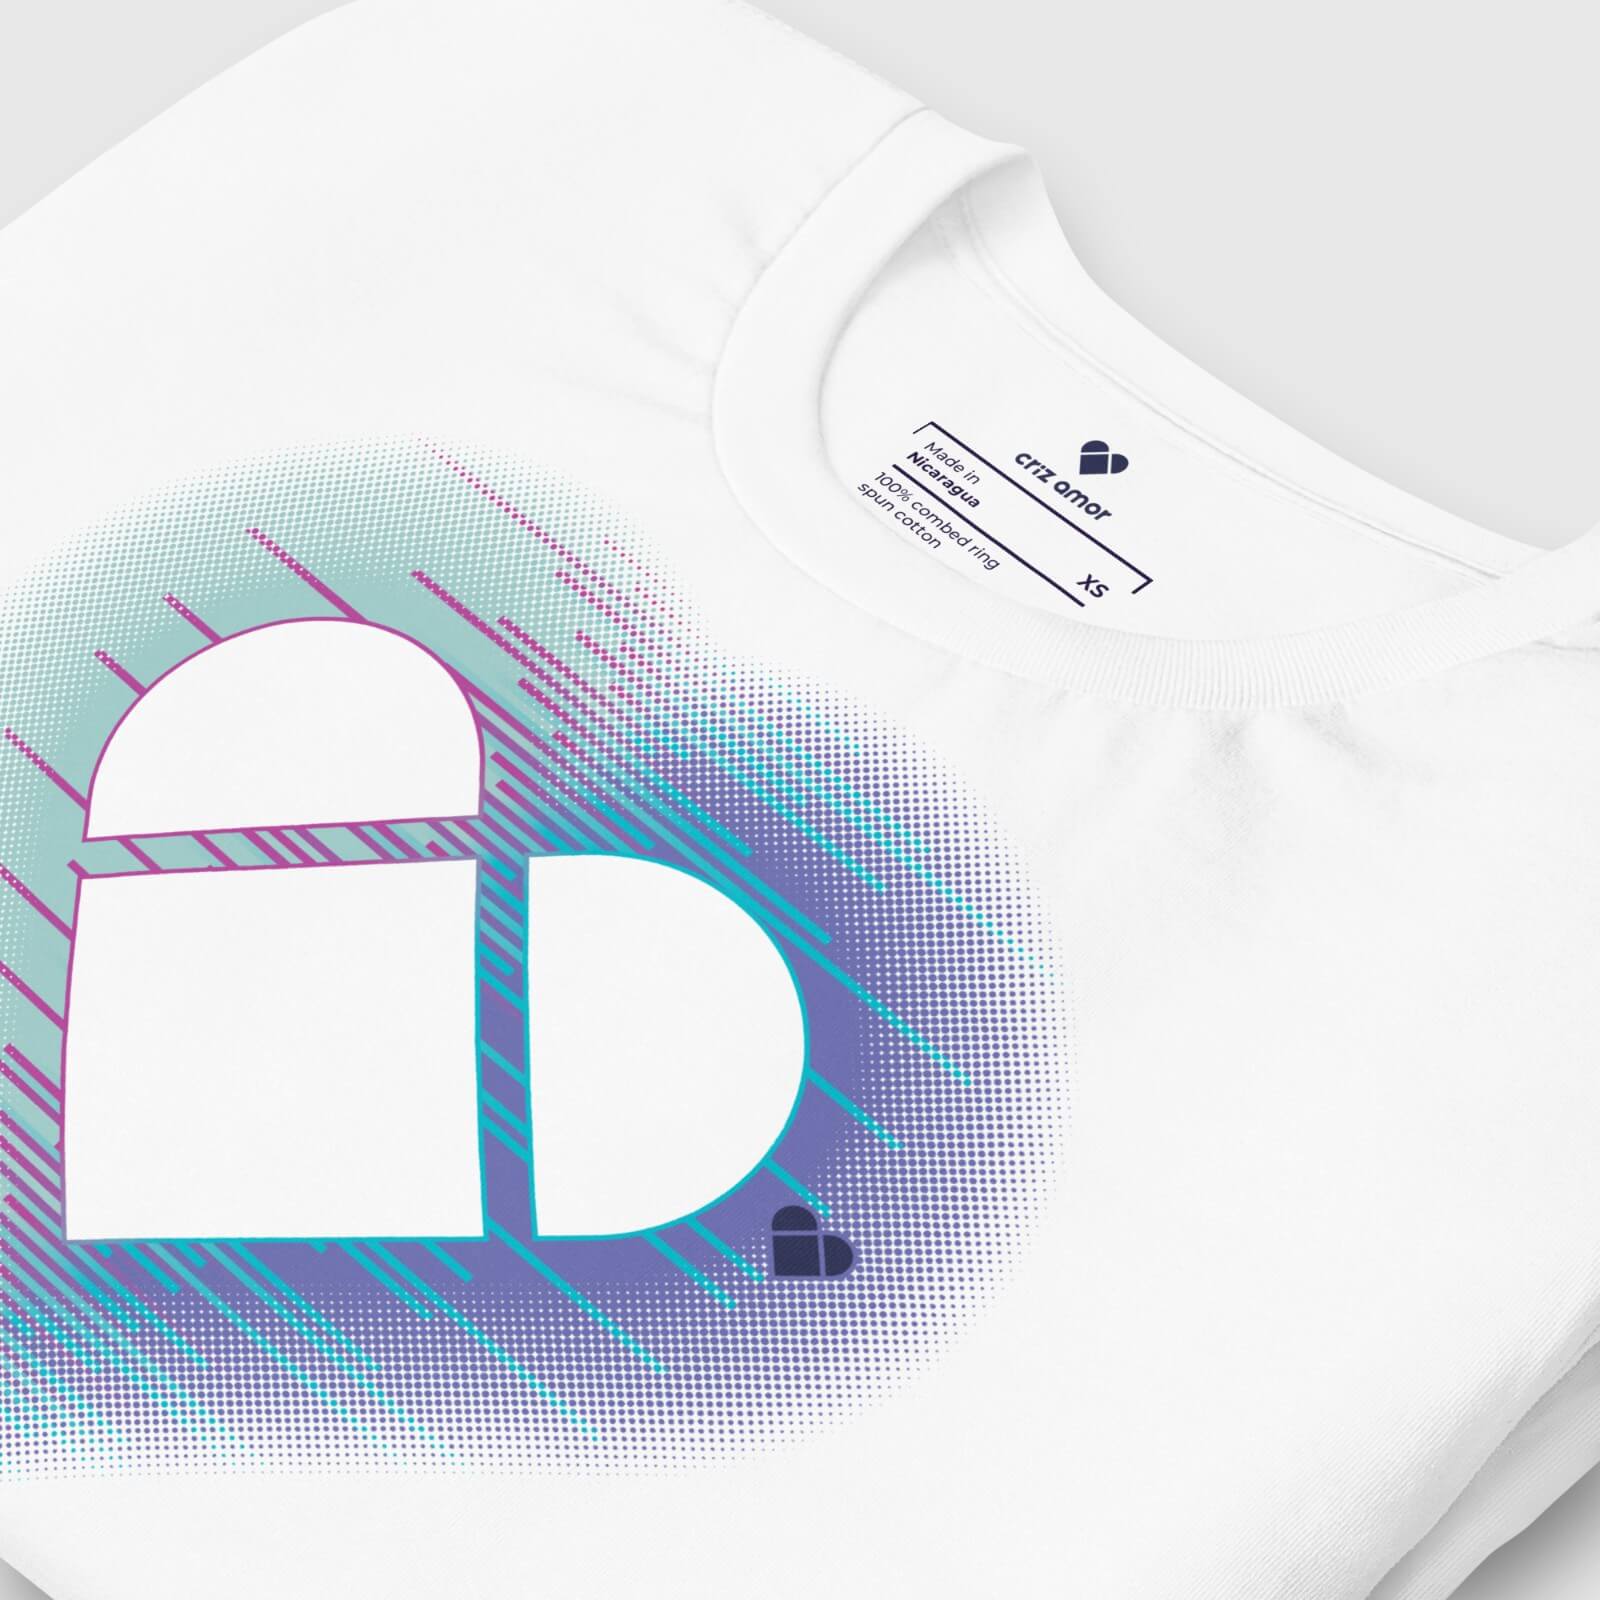 Detailed view of the White Tee from Amor Dual collection with a heart logo and dual color aura